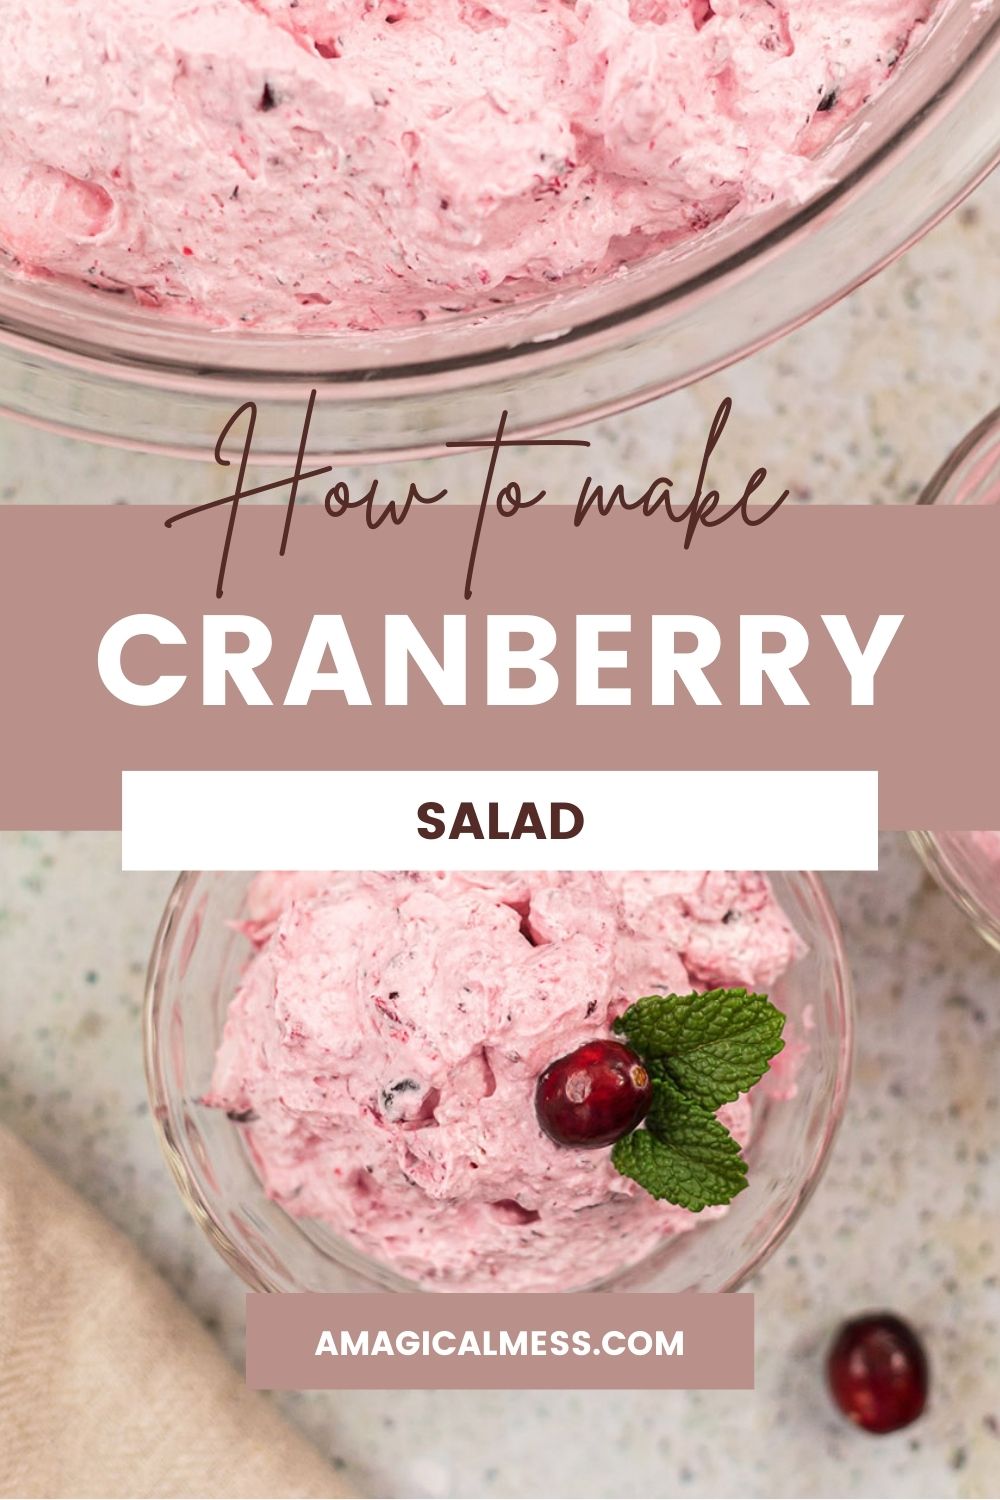 Pink fluffy cranberry salad in a dish and in a bowl.